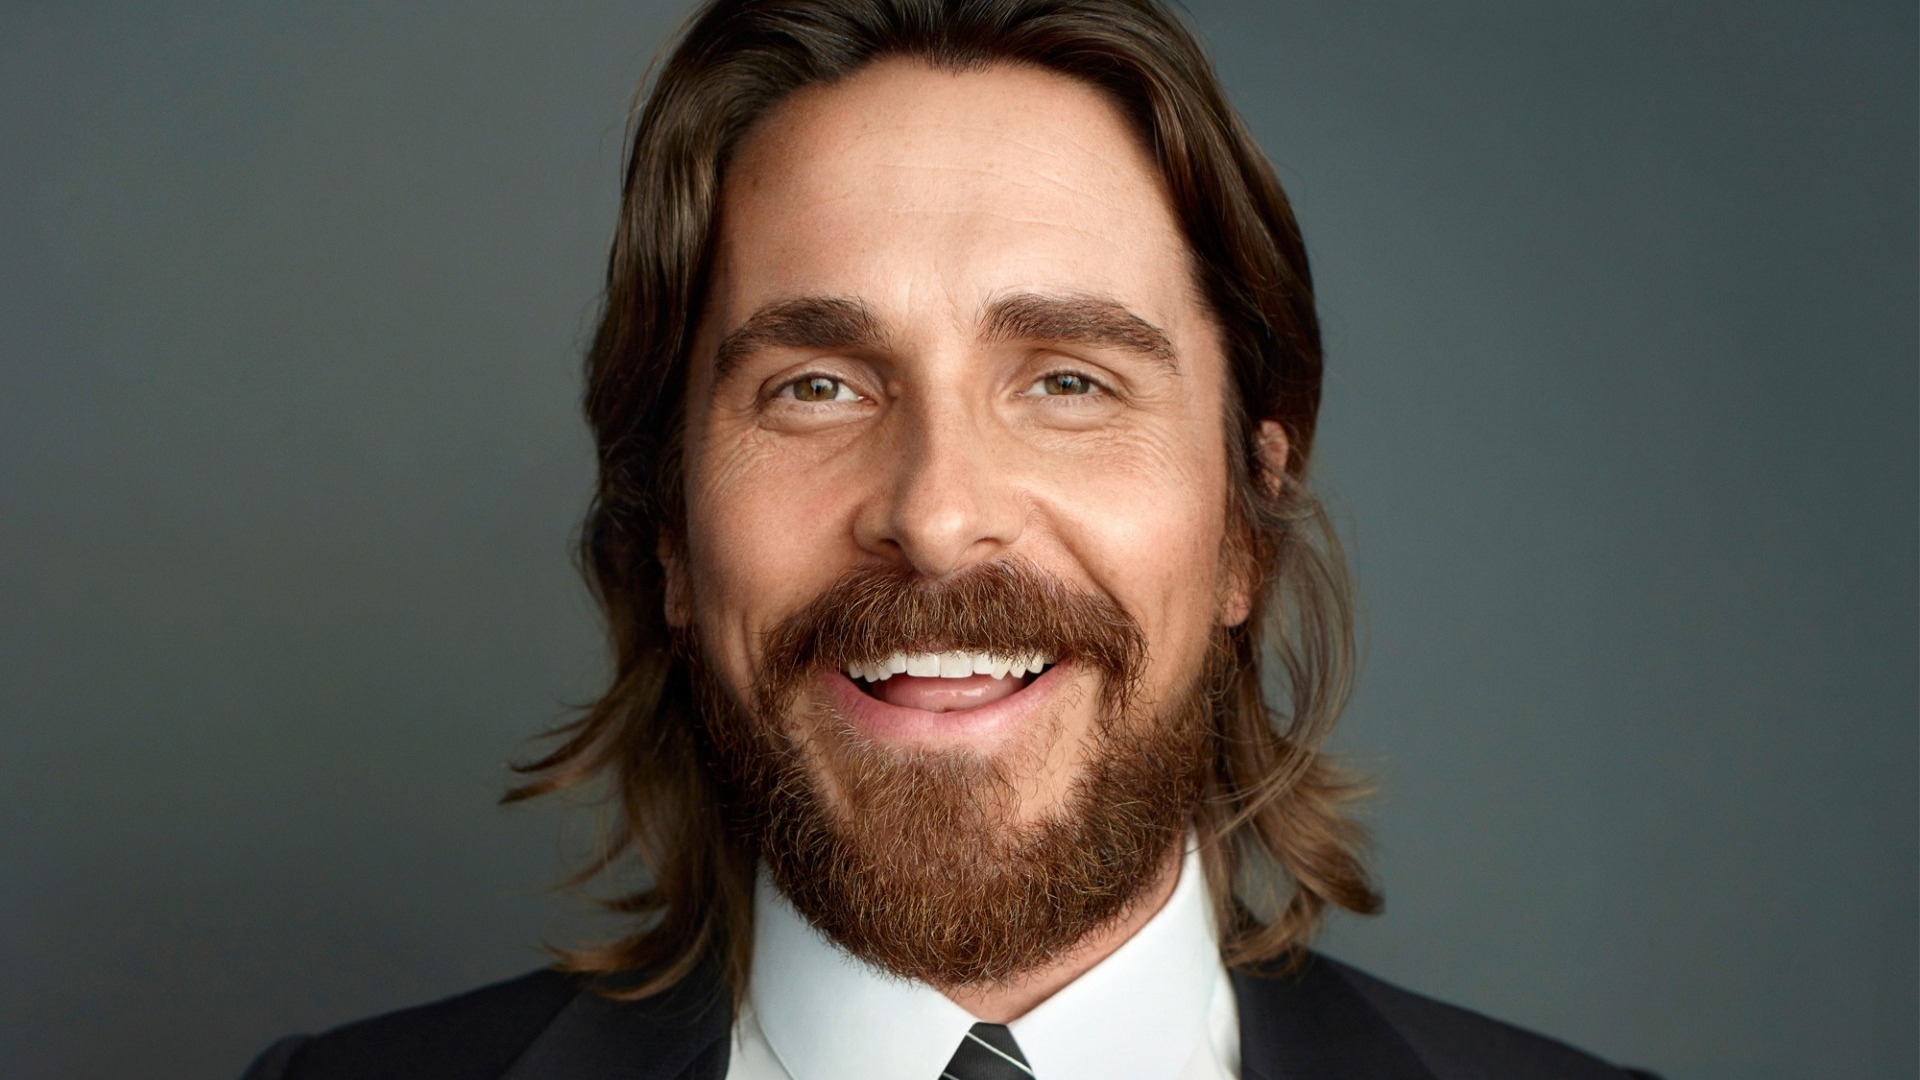 Christian Bale in Suit for 1920 x 1080 HDTV 1080p resolution